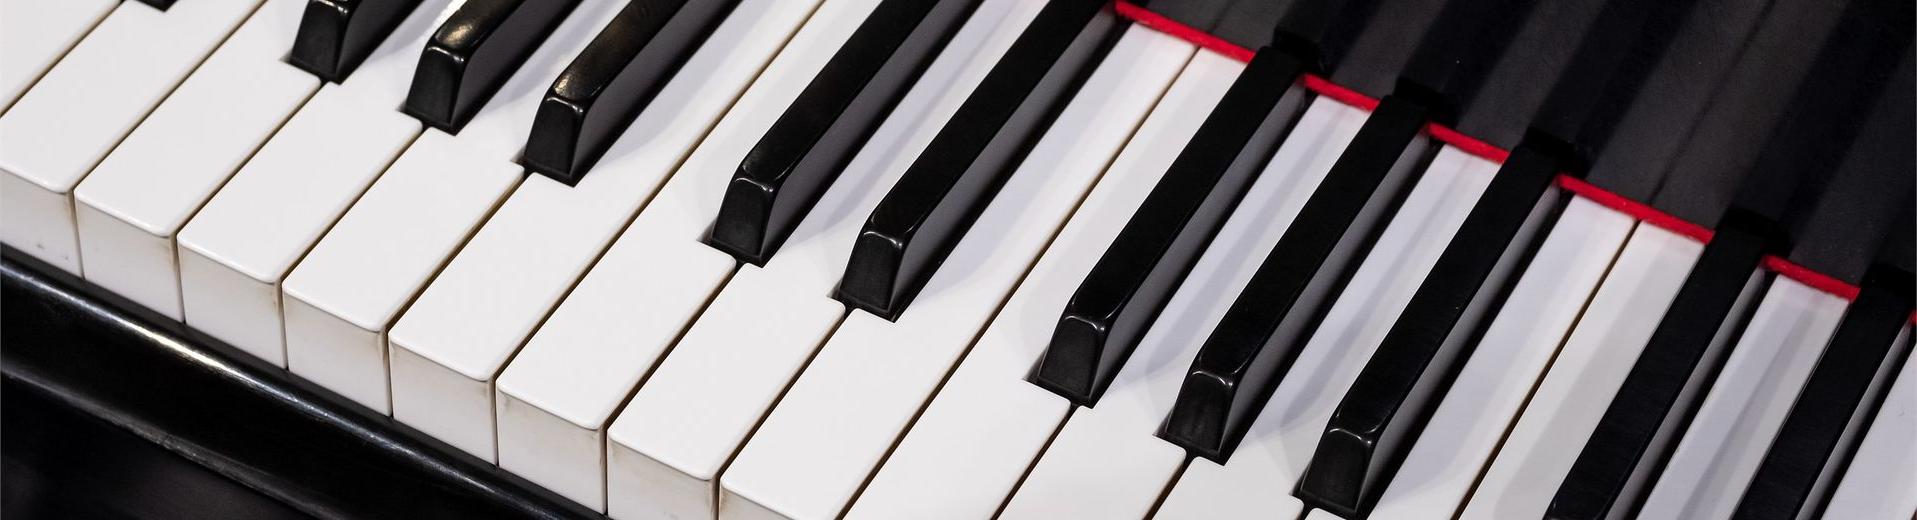 The black-和-white keys of a Steinway piano.